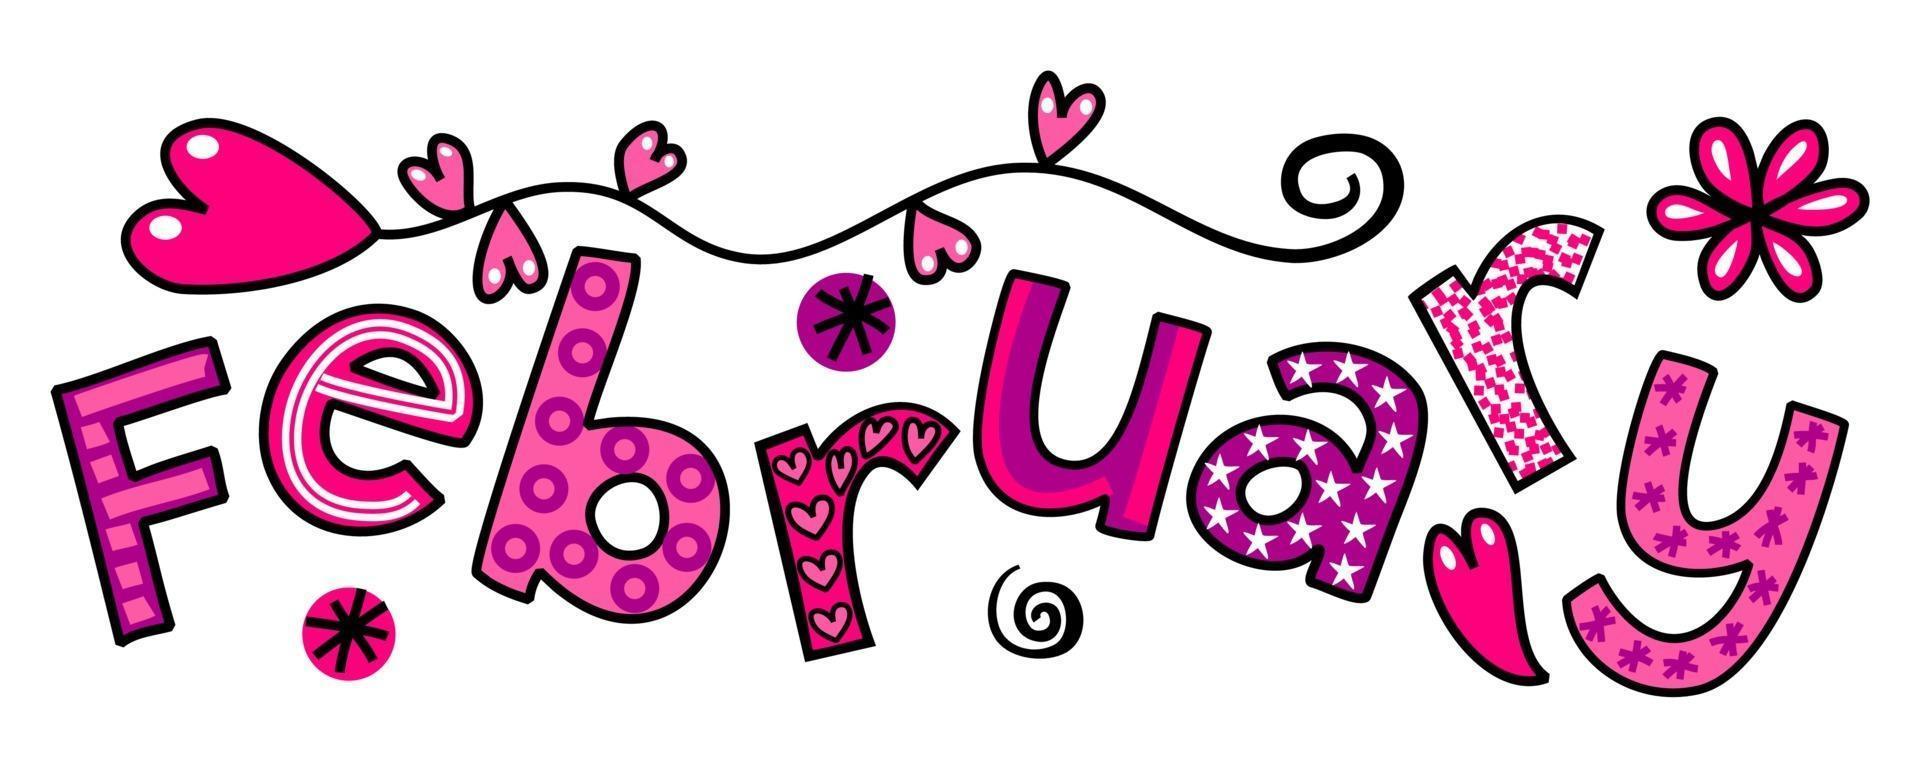 February Month of the Year Doodle Text Lettering vector